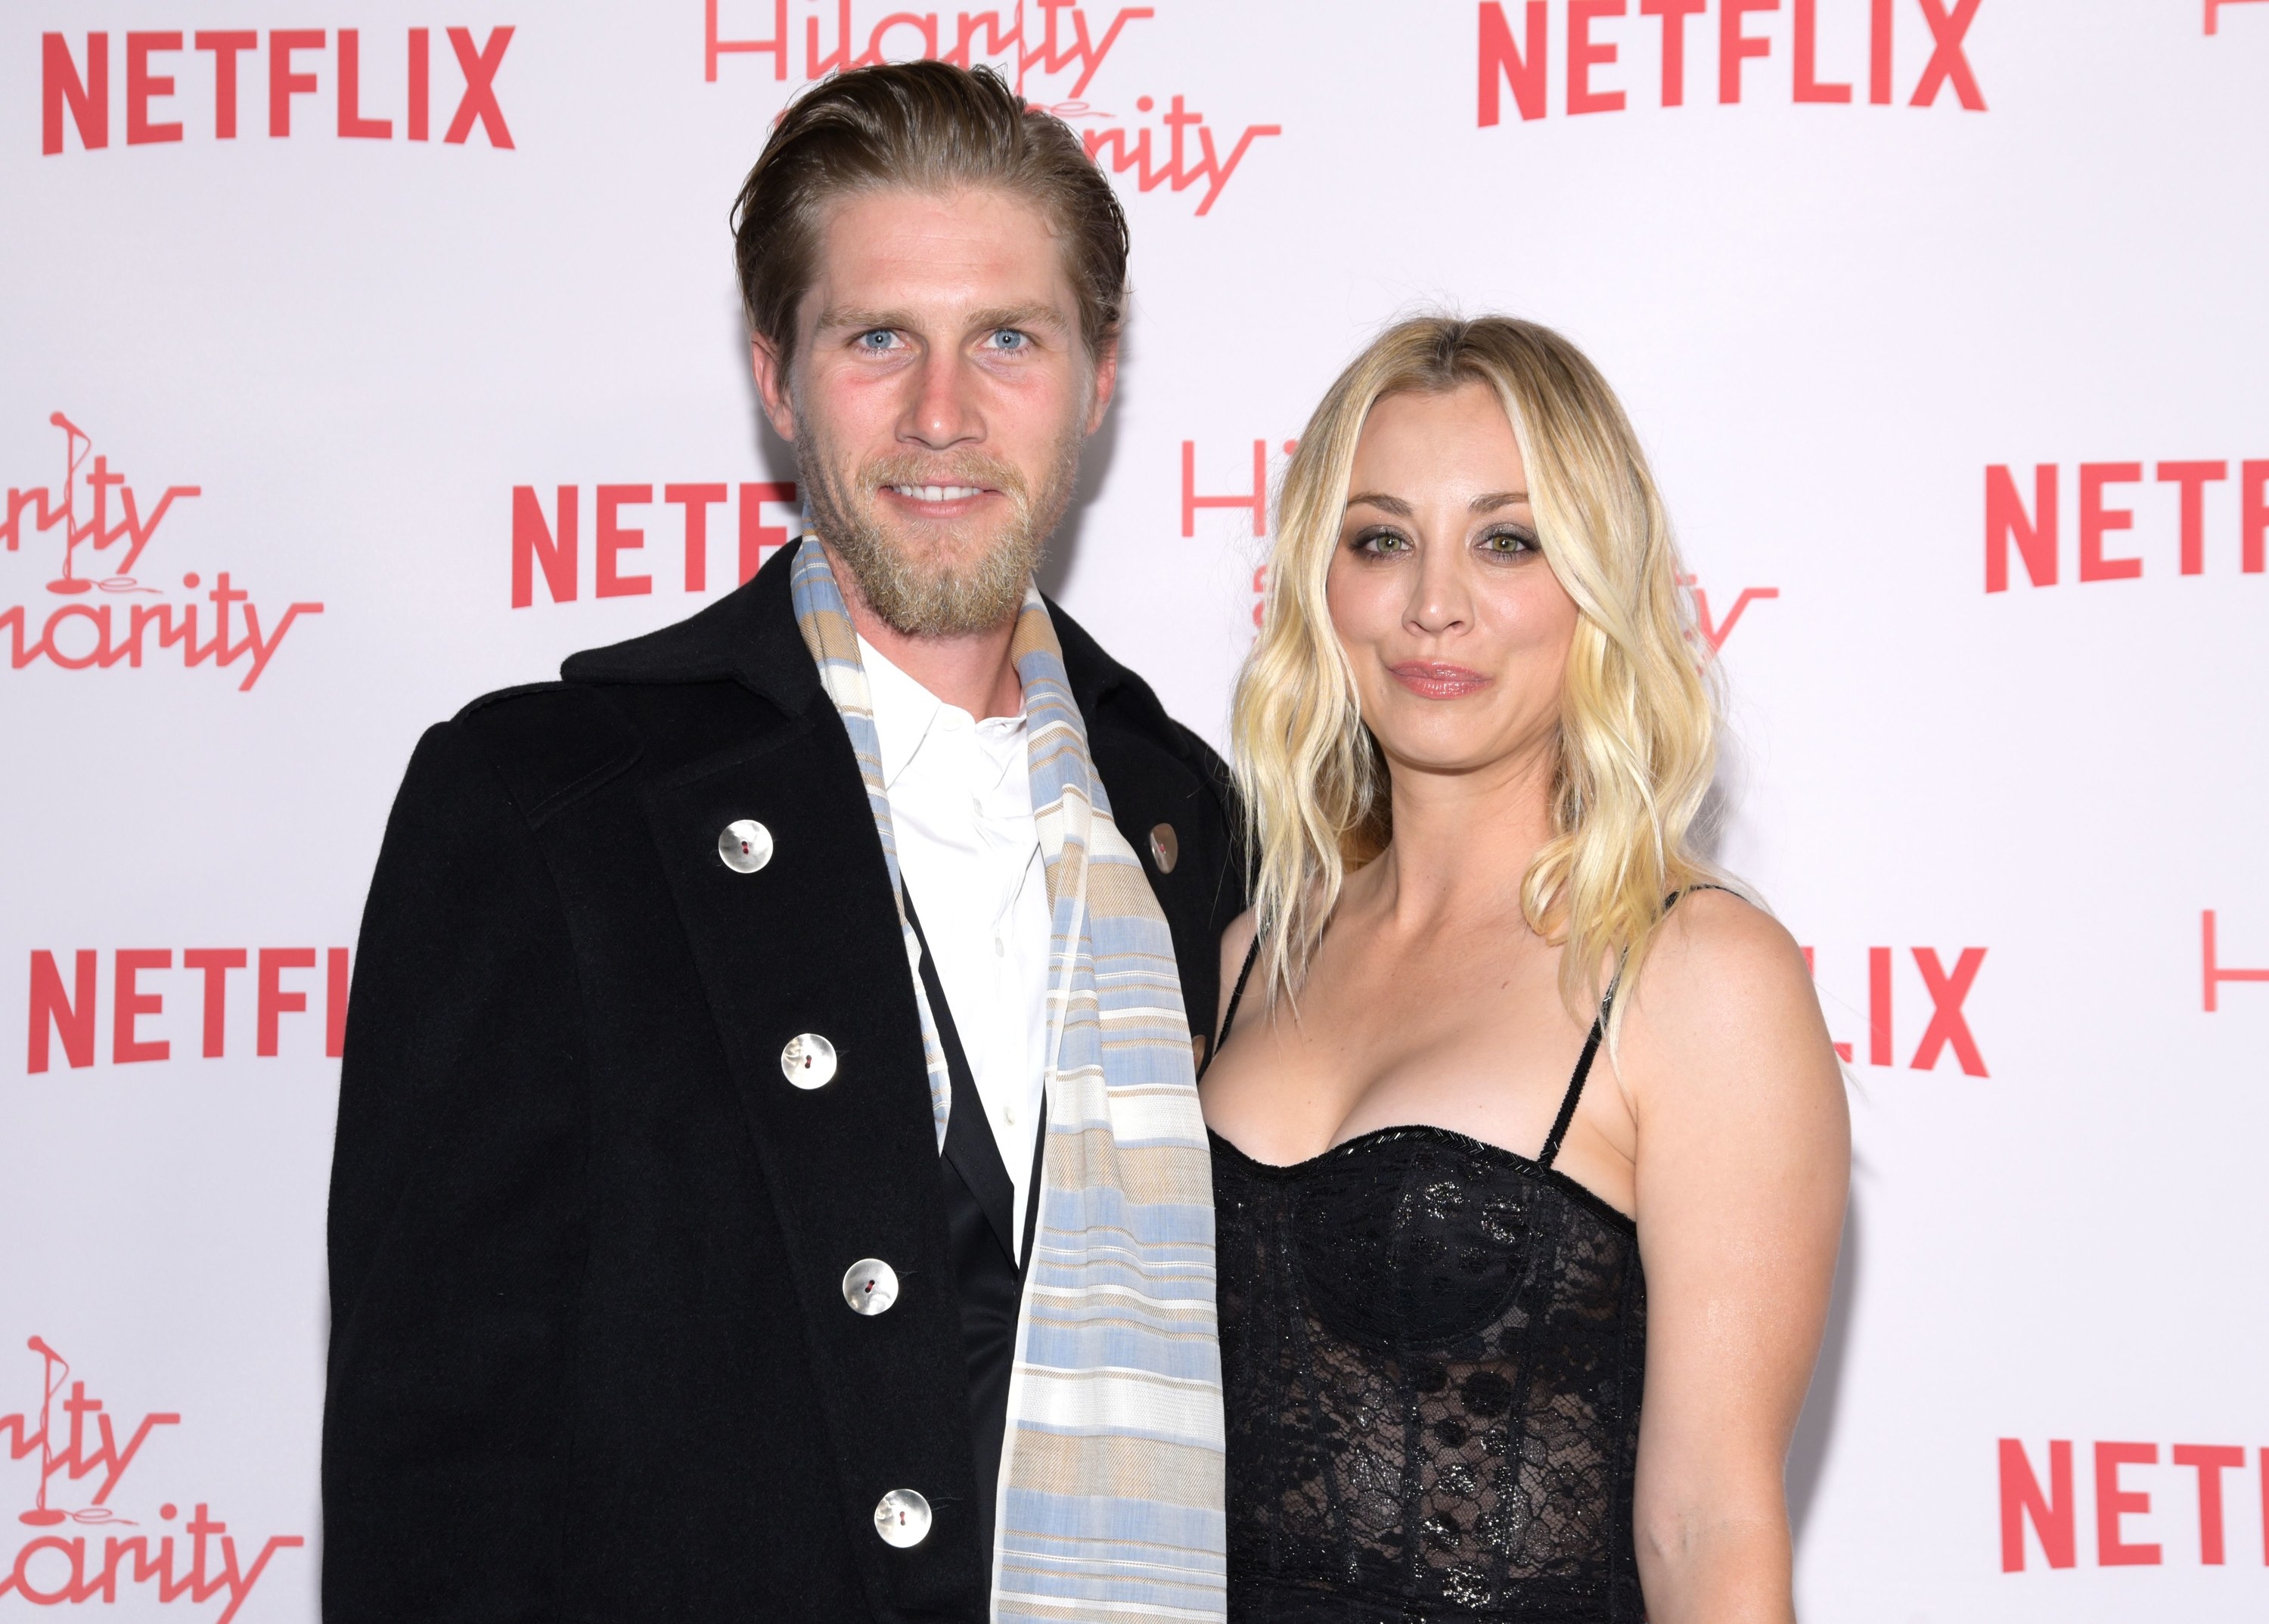 Kaley cuoco and karl cook